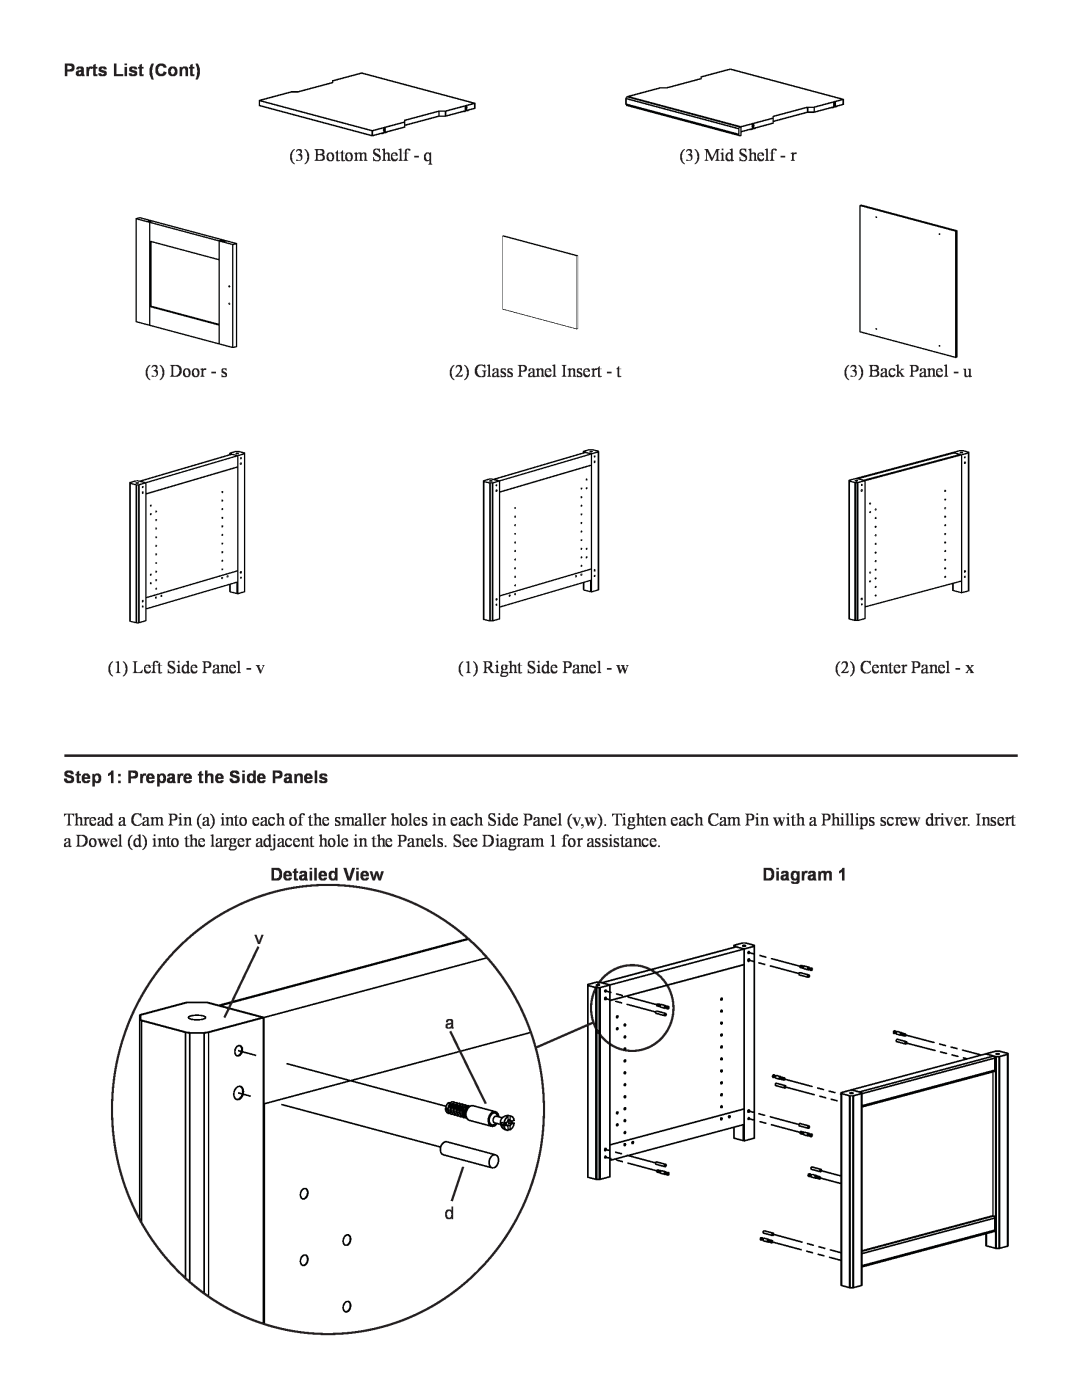 Sanus Systems WFV66 manual Parts List Cont, Prepare the Side Panels, Detailed View 